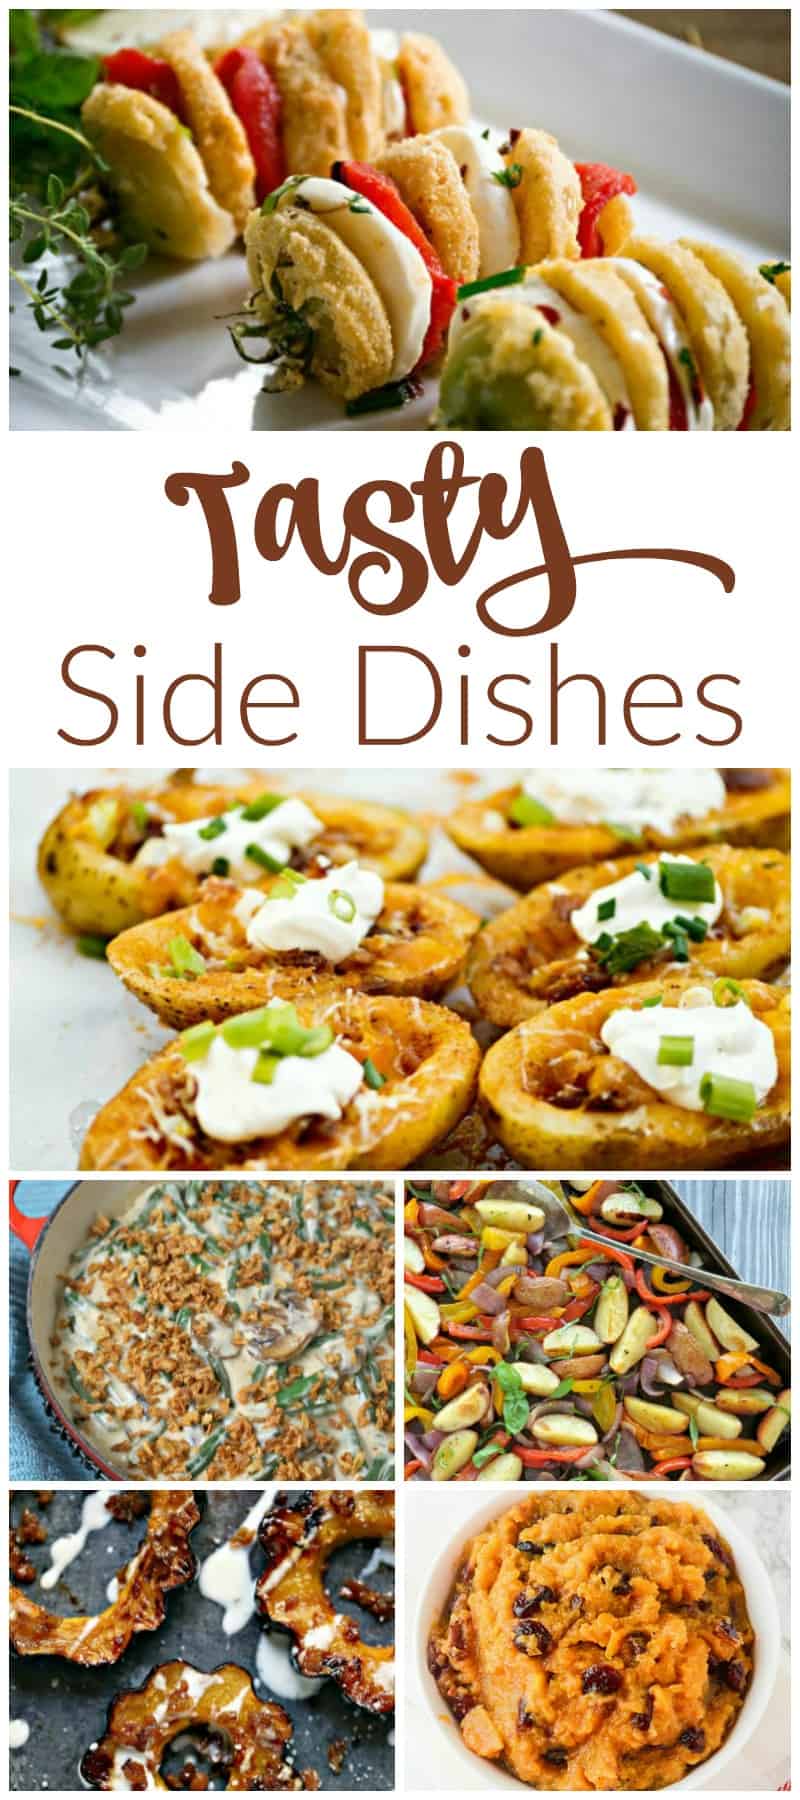 Tasty Side Dishes - Side Dish Recipes